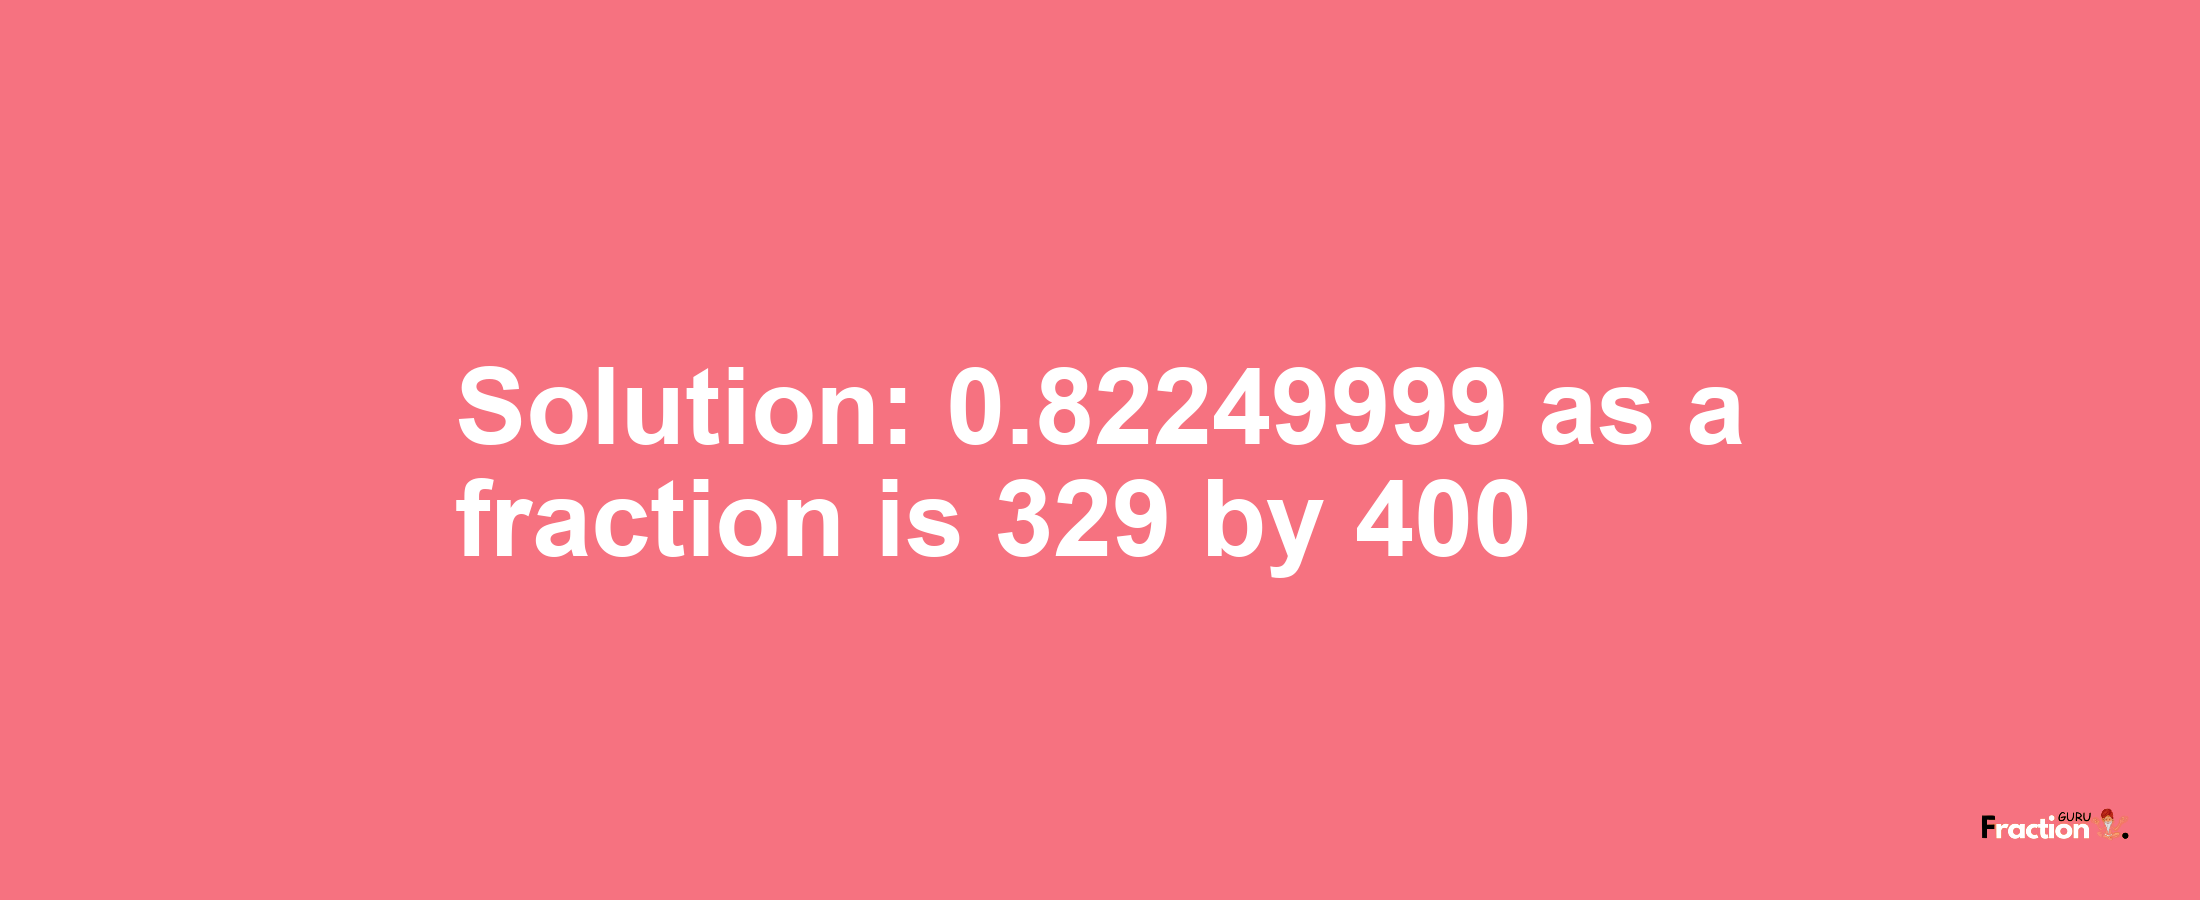 Solution:0.82249999 as a fraction is 329/400